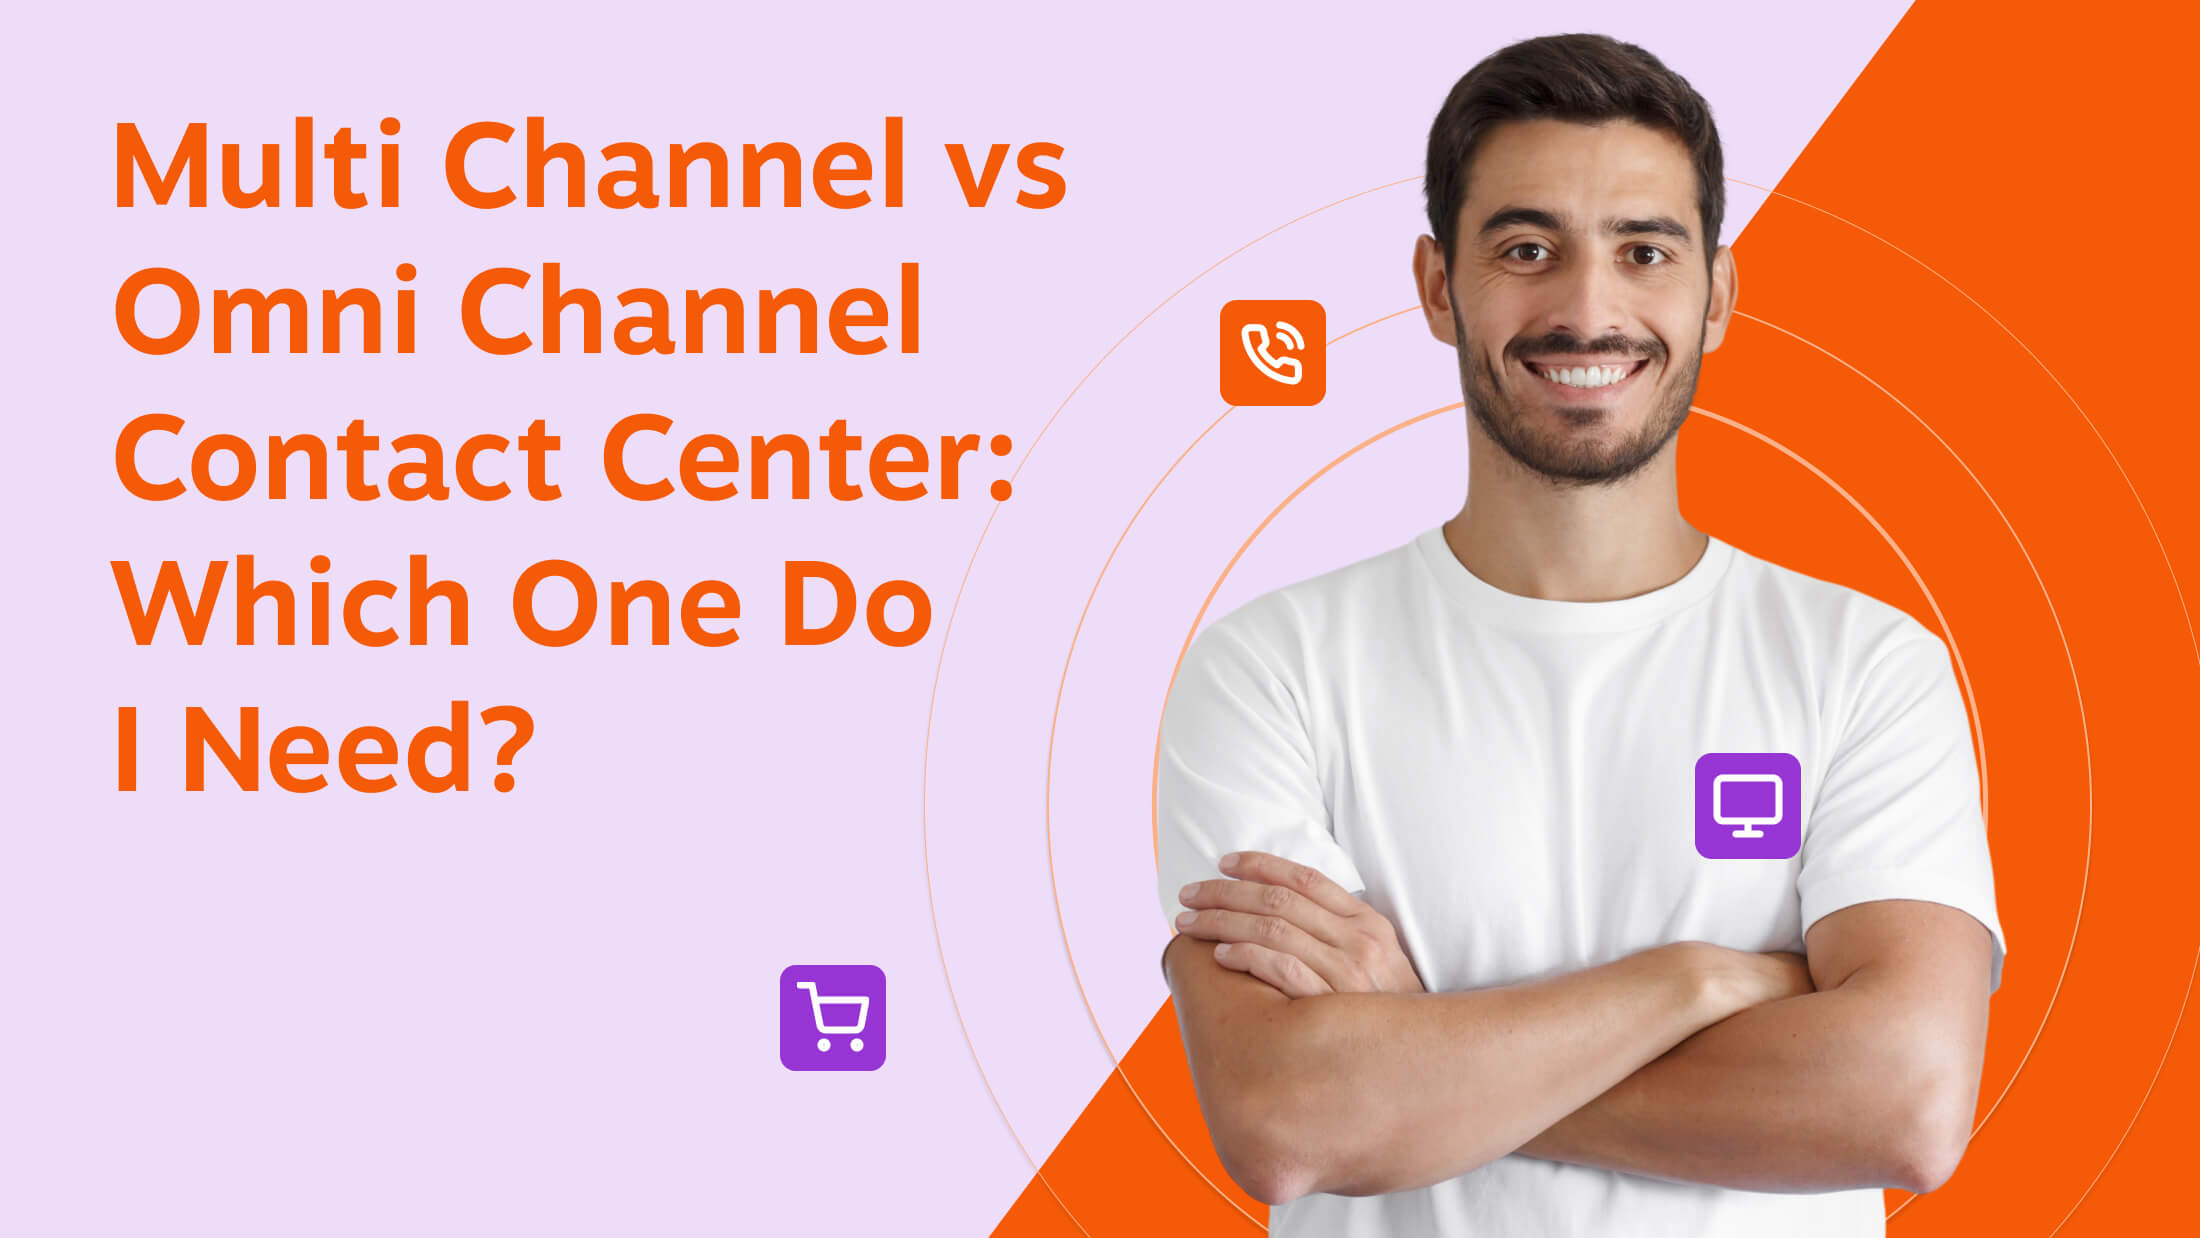 multichannel vs omni channel contact center - which one do I need